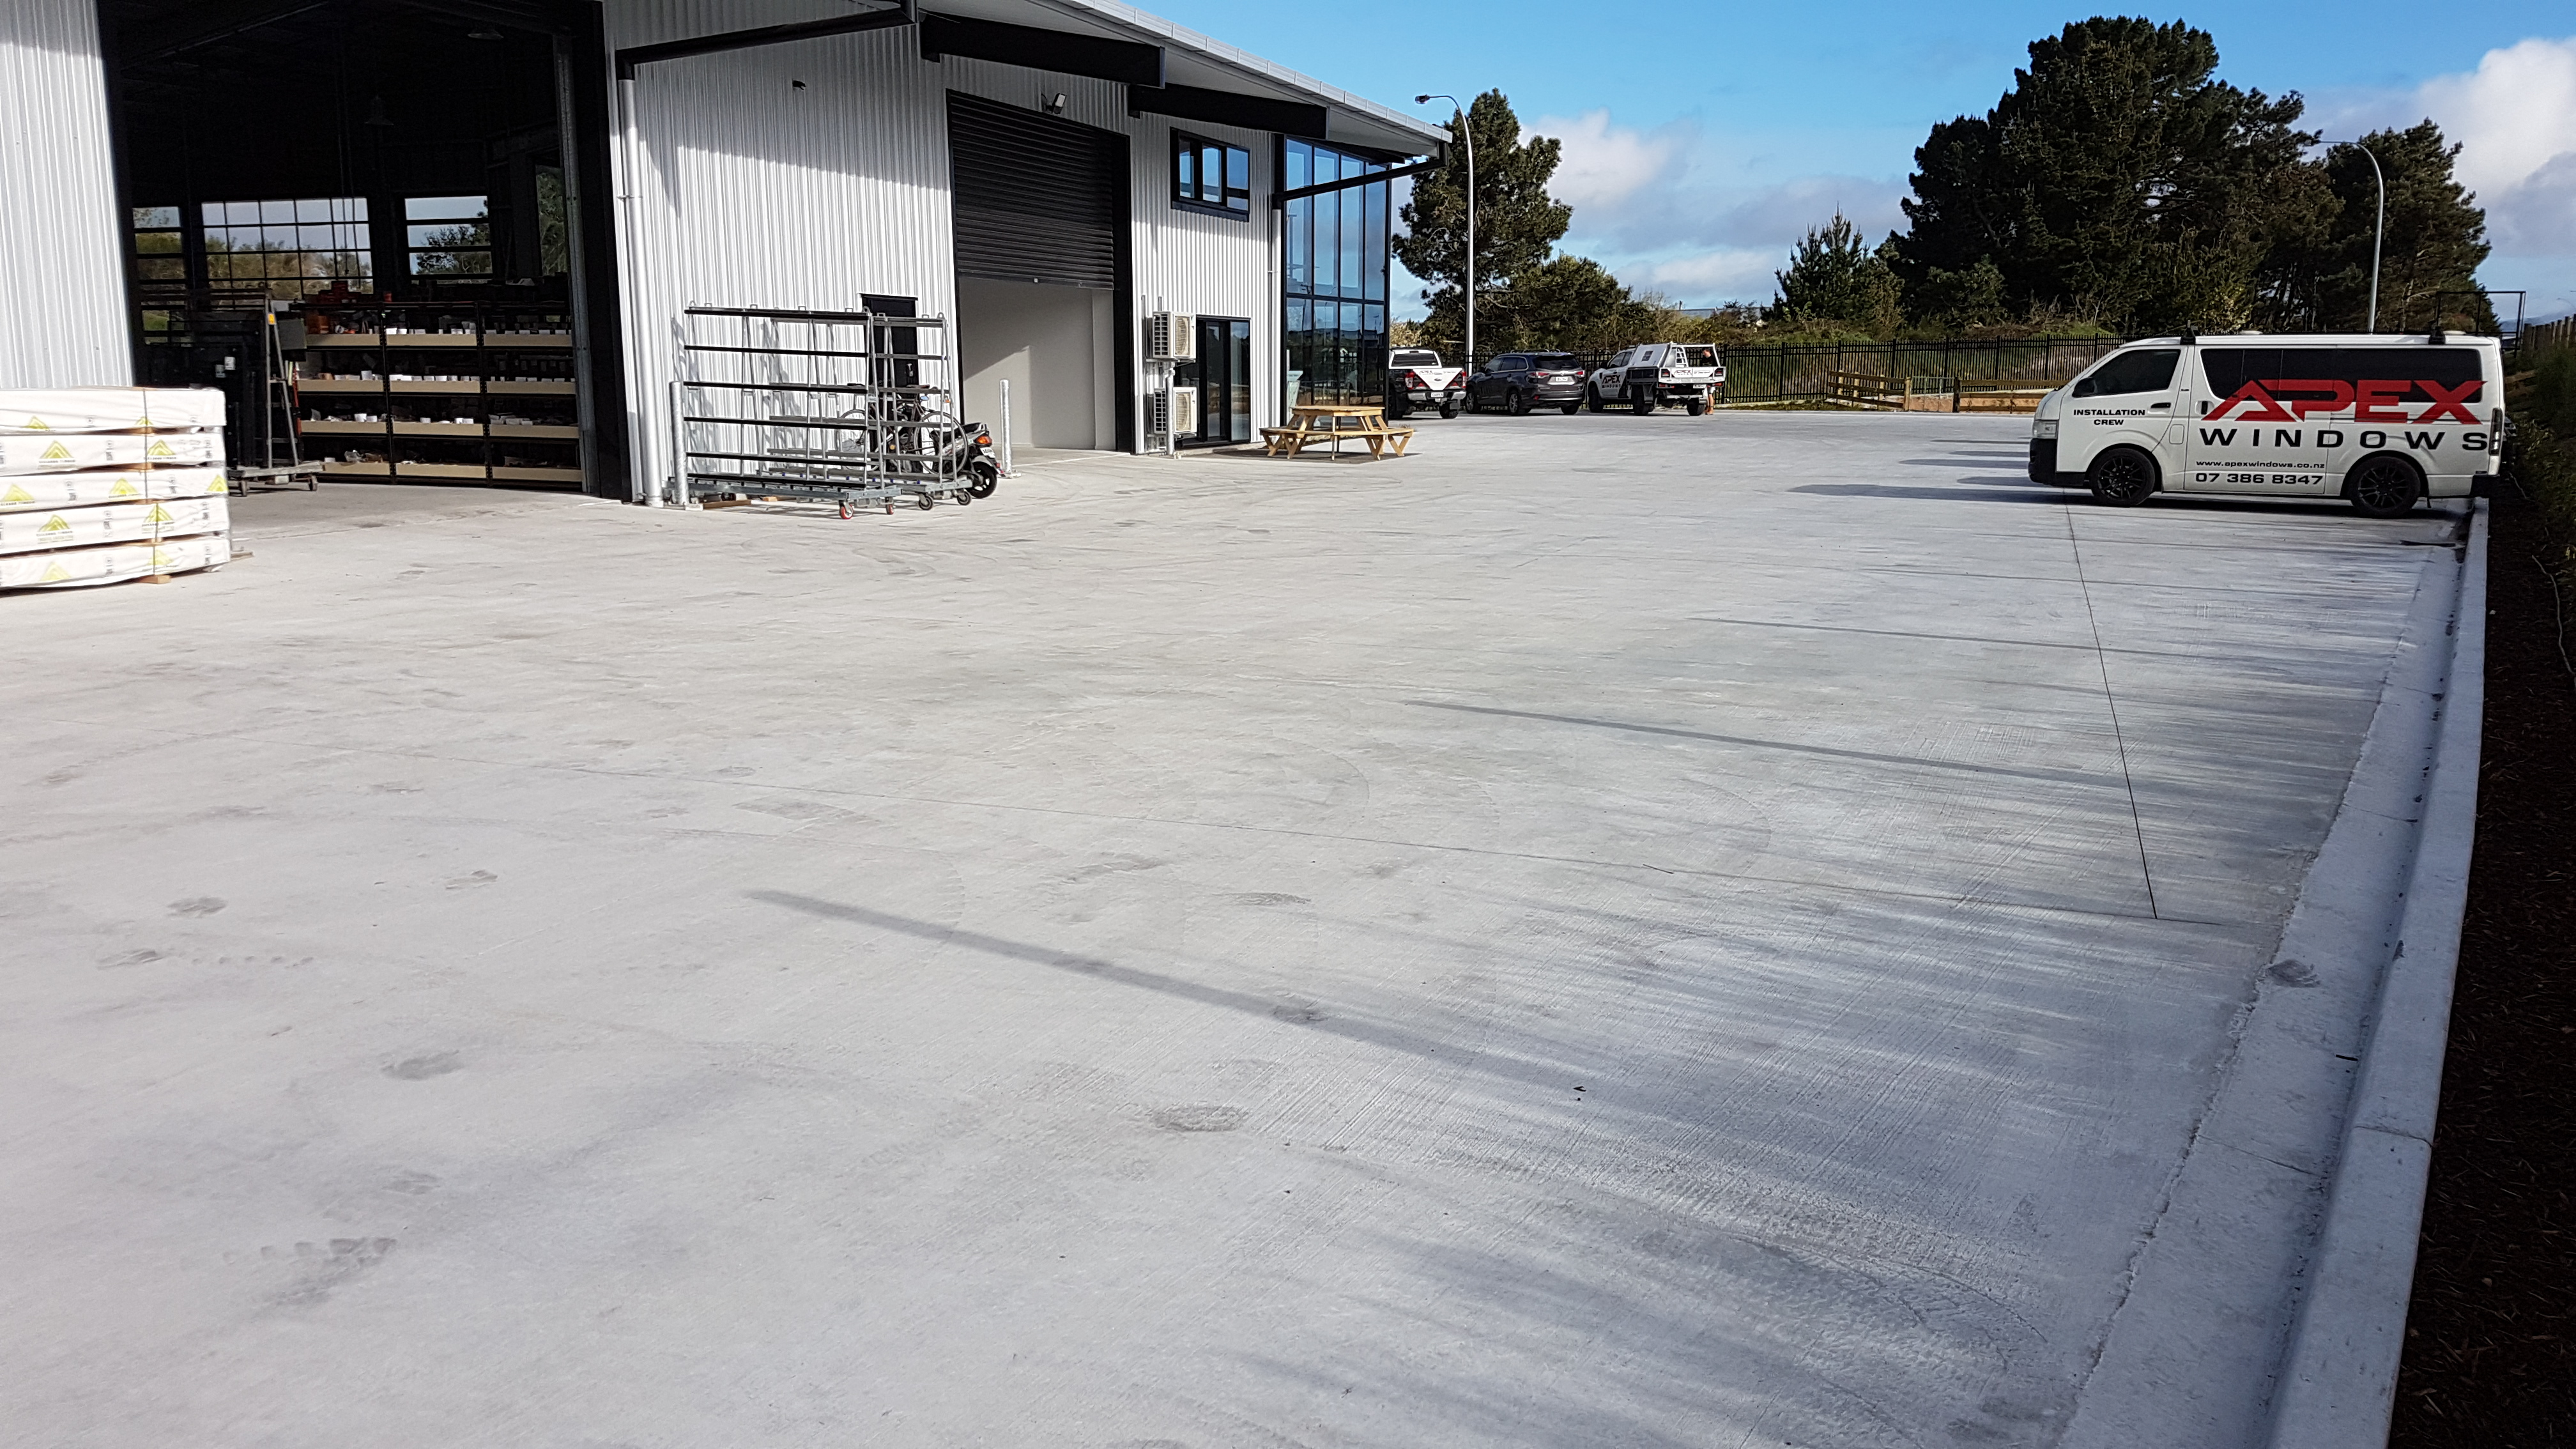 Concrete work in a commercial yard loading bay and parking zone with concrete reinforced with Inforce Proforce hookend steel fibre